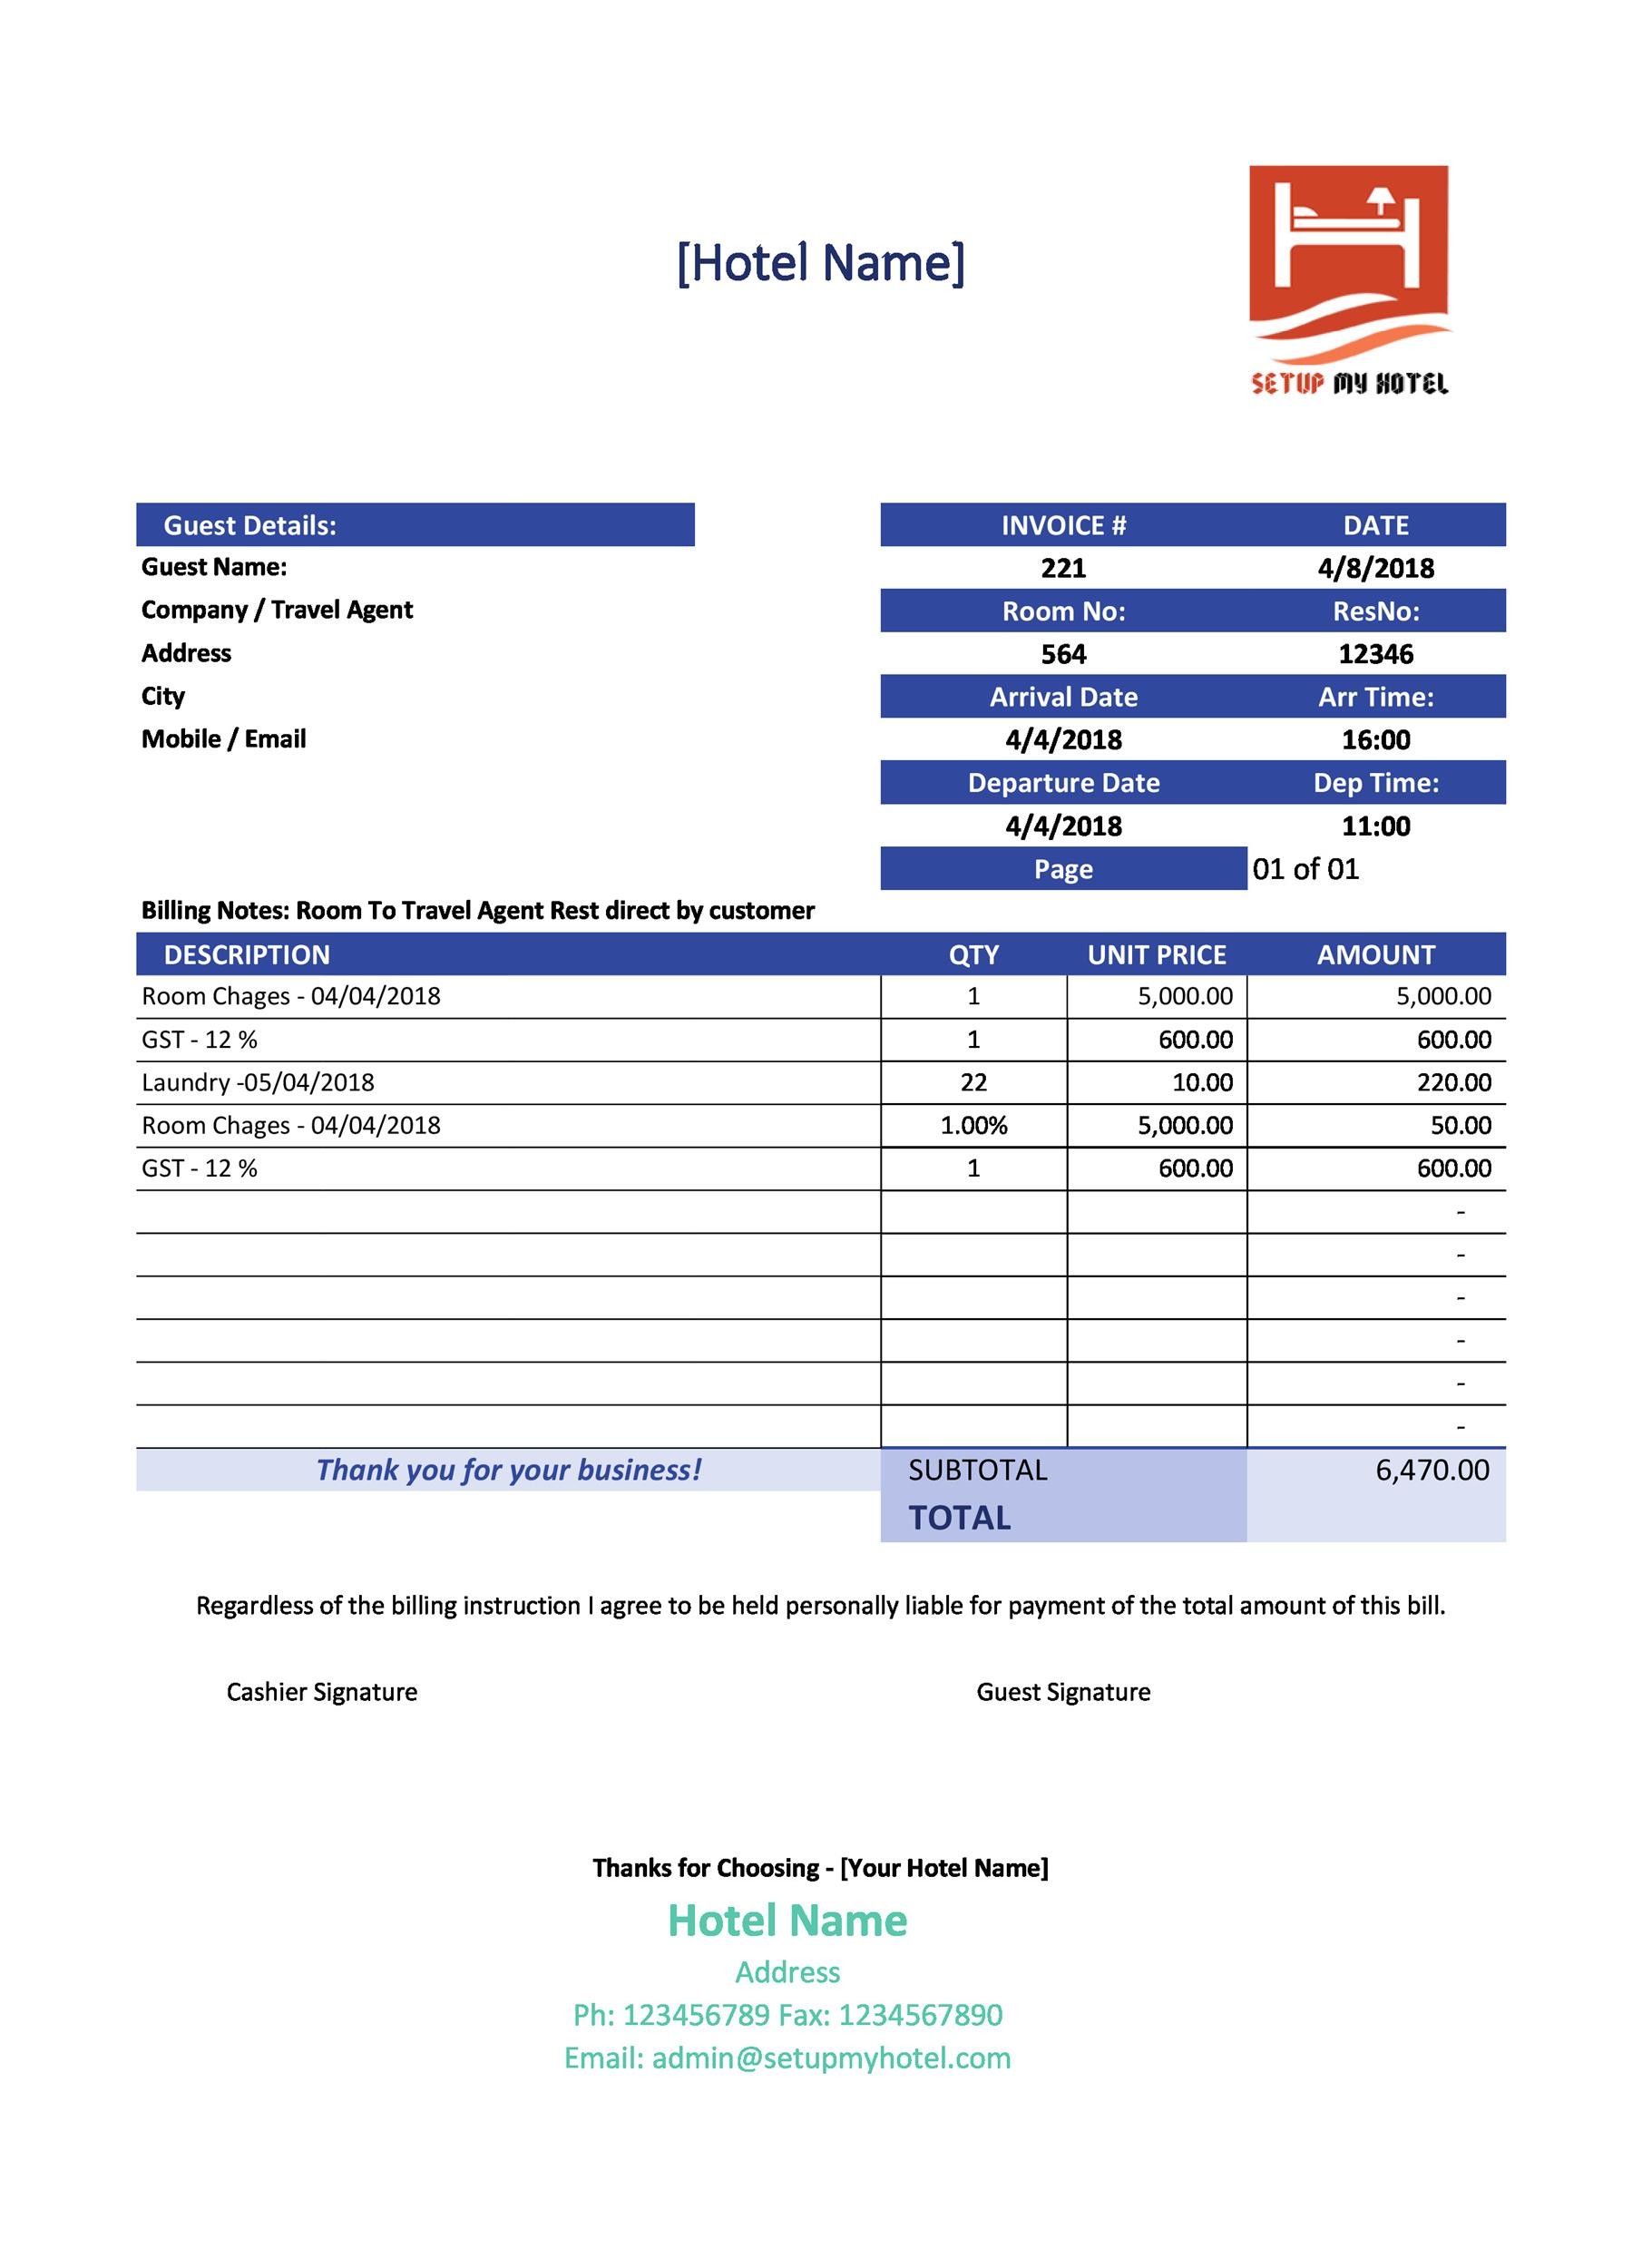 Holiday Inn Receipt Online TUTORE ORG Master Of Documents